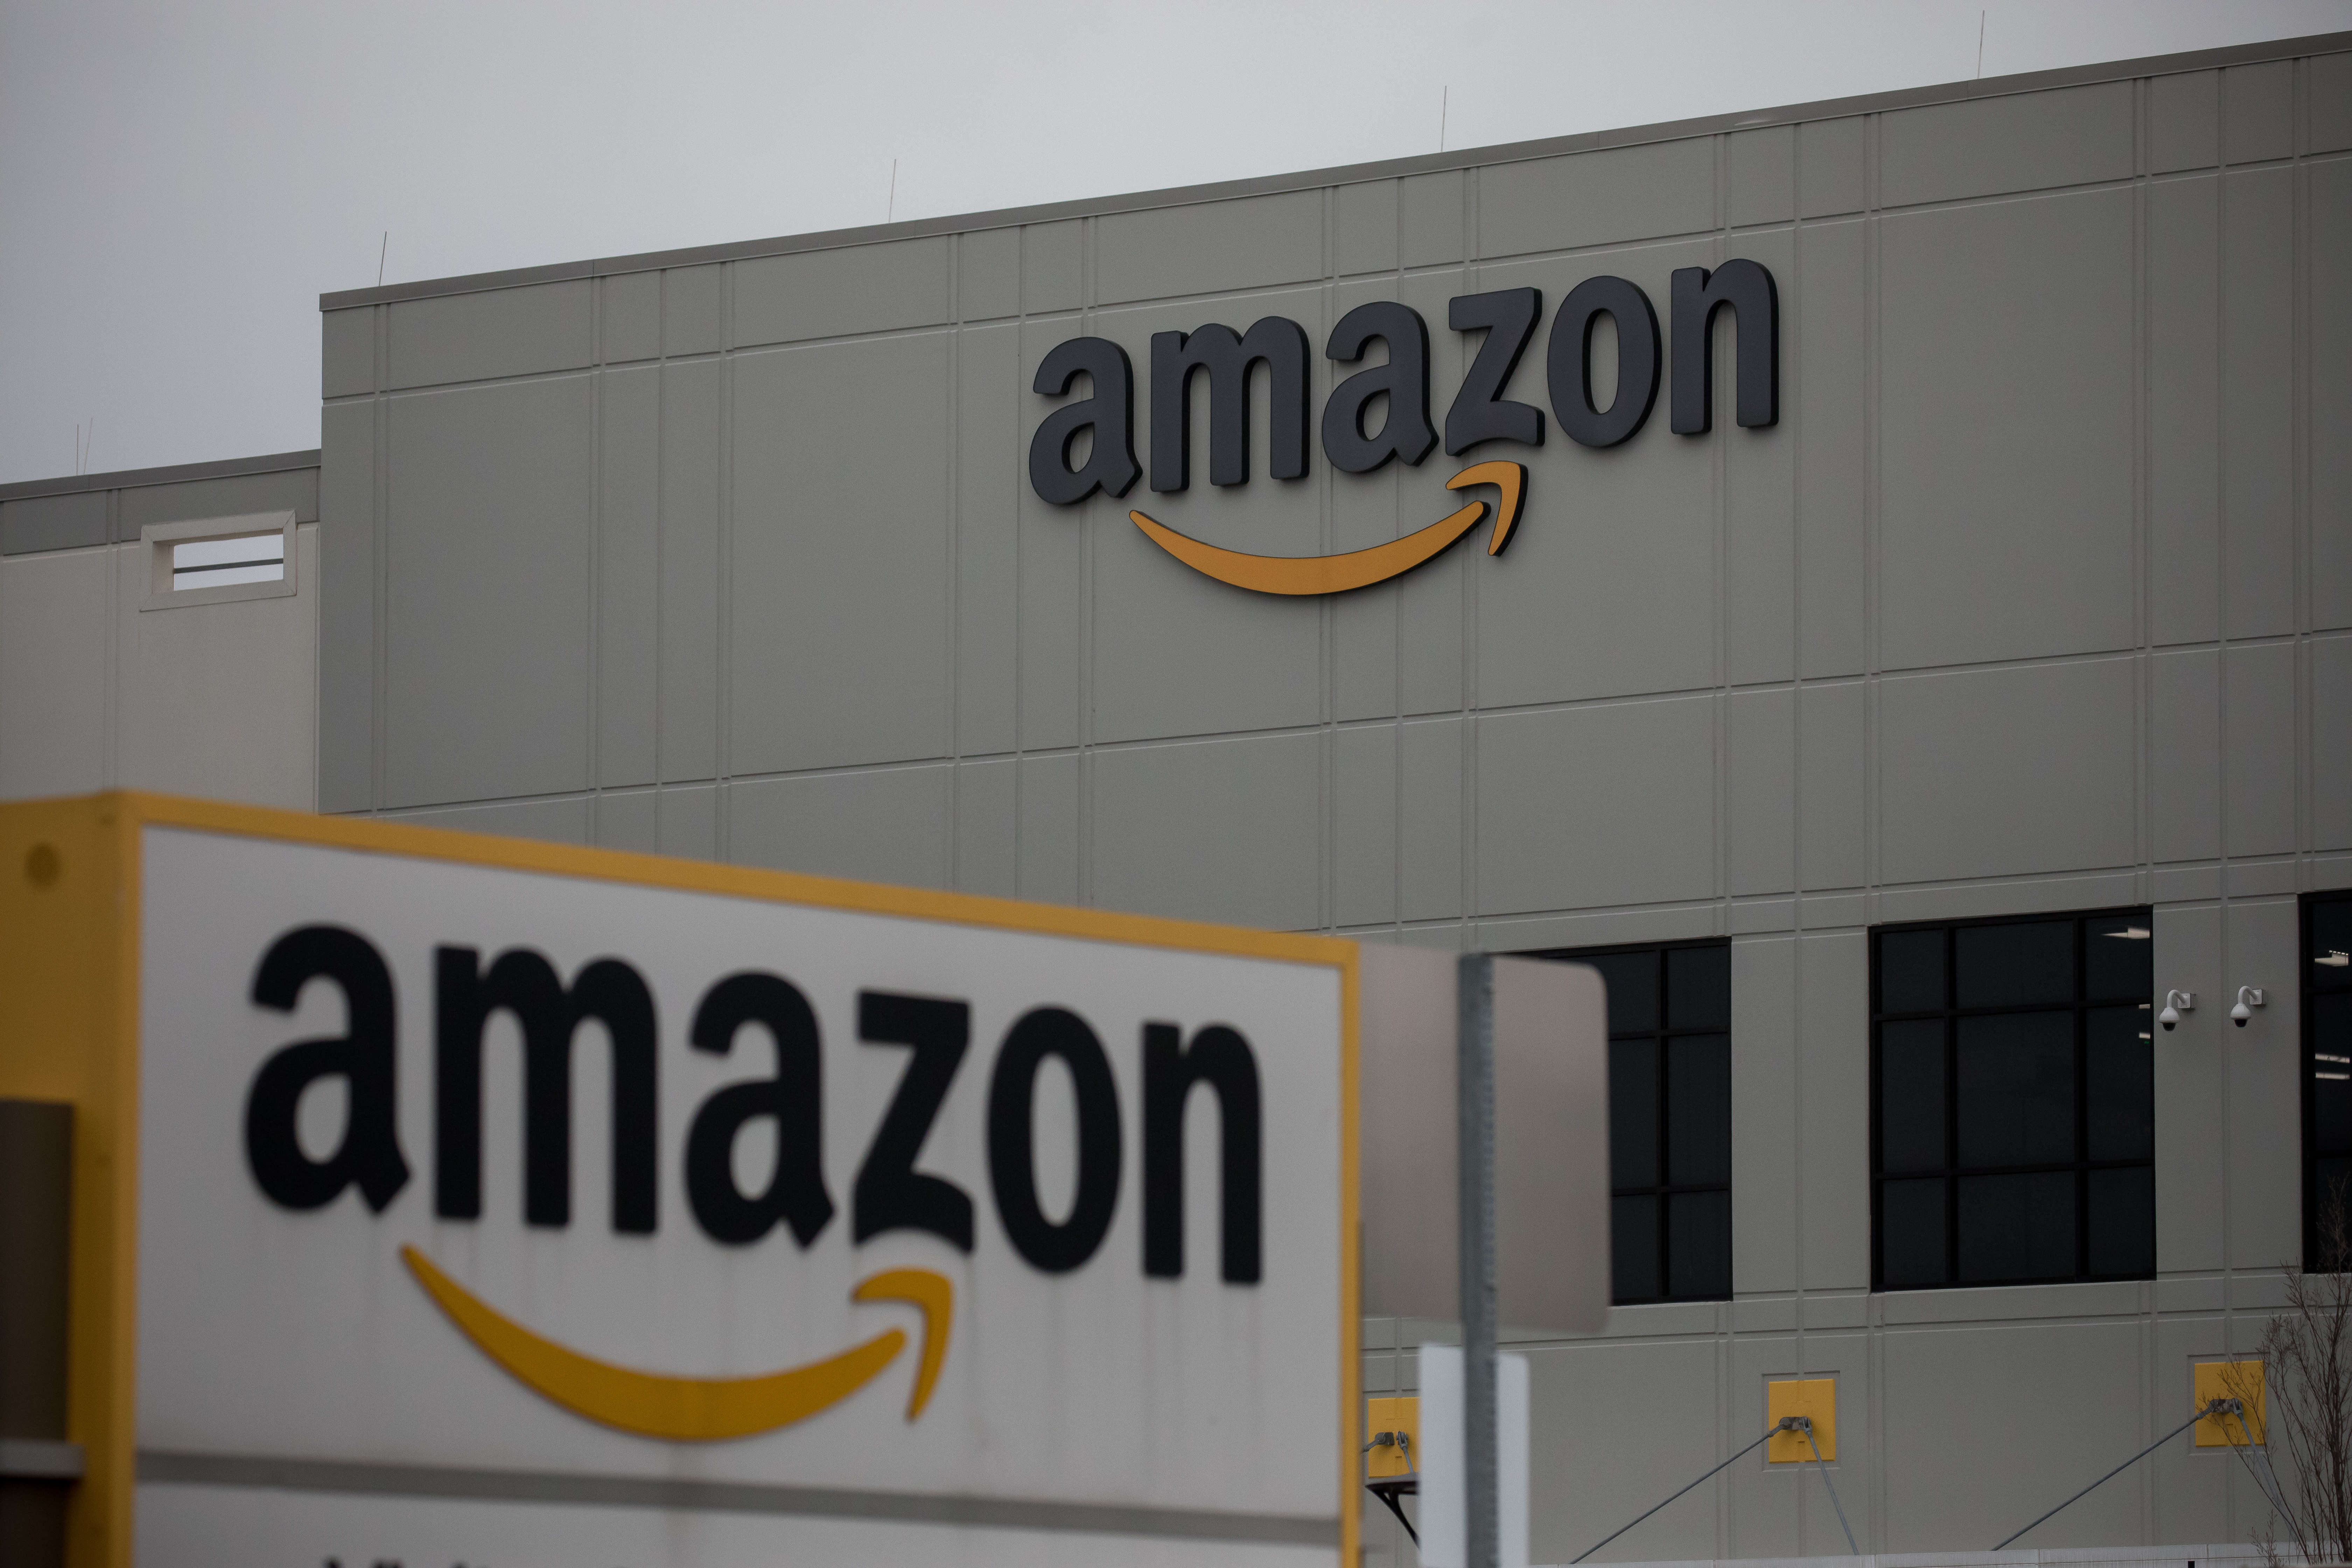 Amazon.com Inc. signage is displayed in front of a warehouse in Staten Island, New York, US, on Tuesday, March 31, 2020.